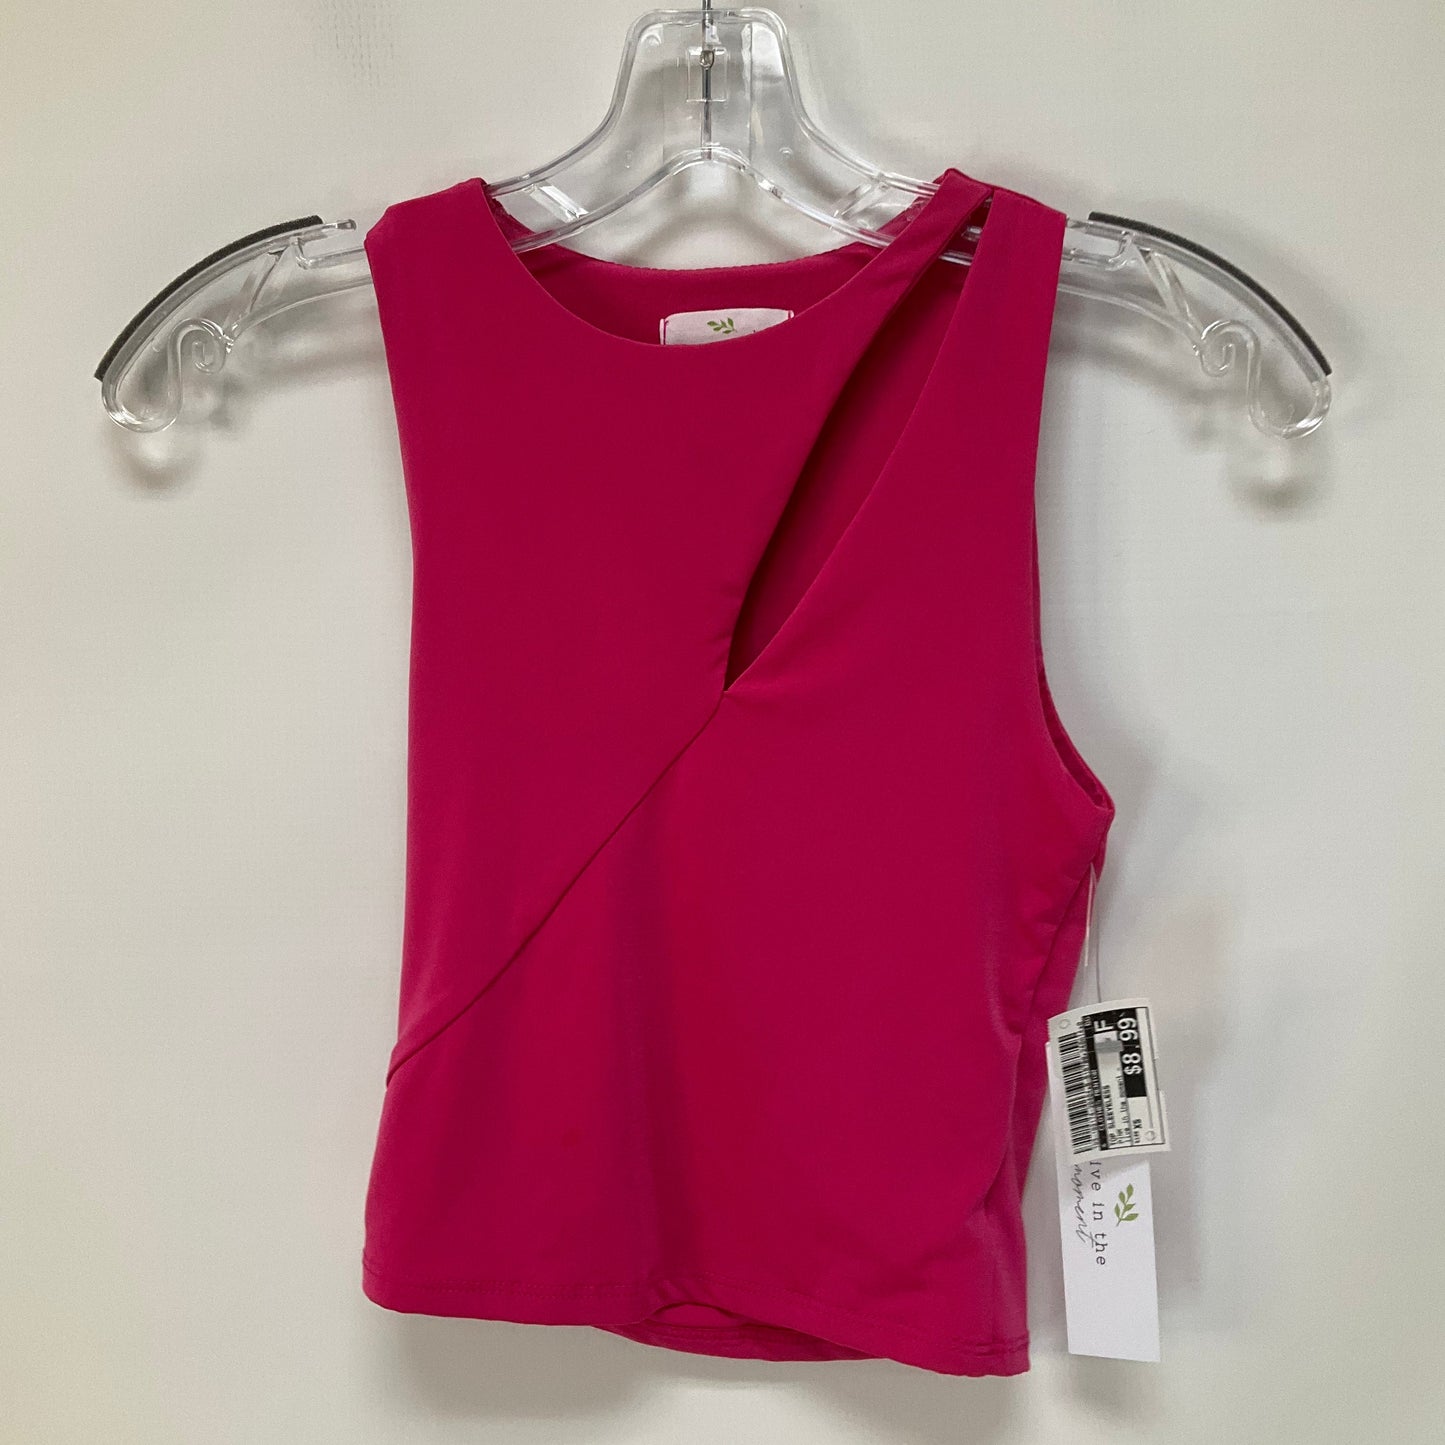 Pink Top Sleeveless Clothes Mentor, Size Xs